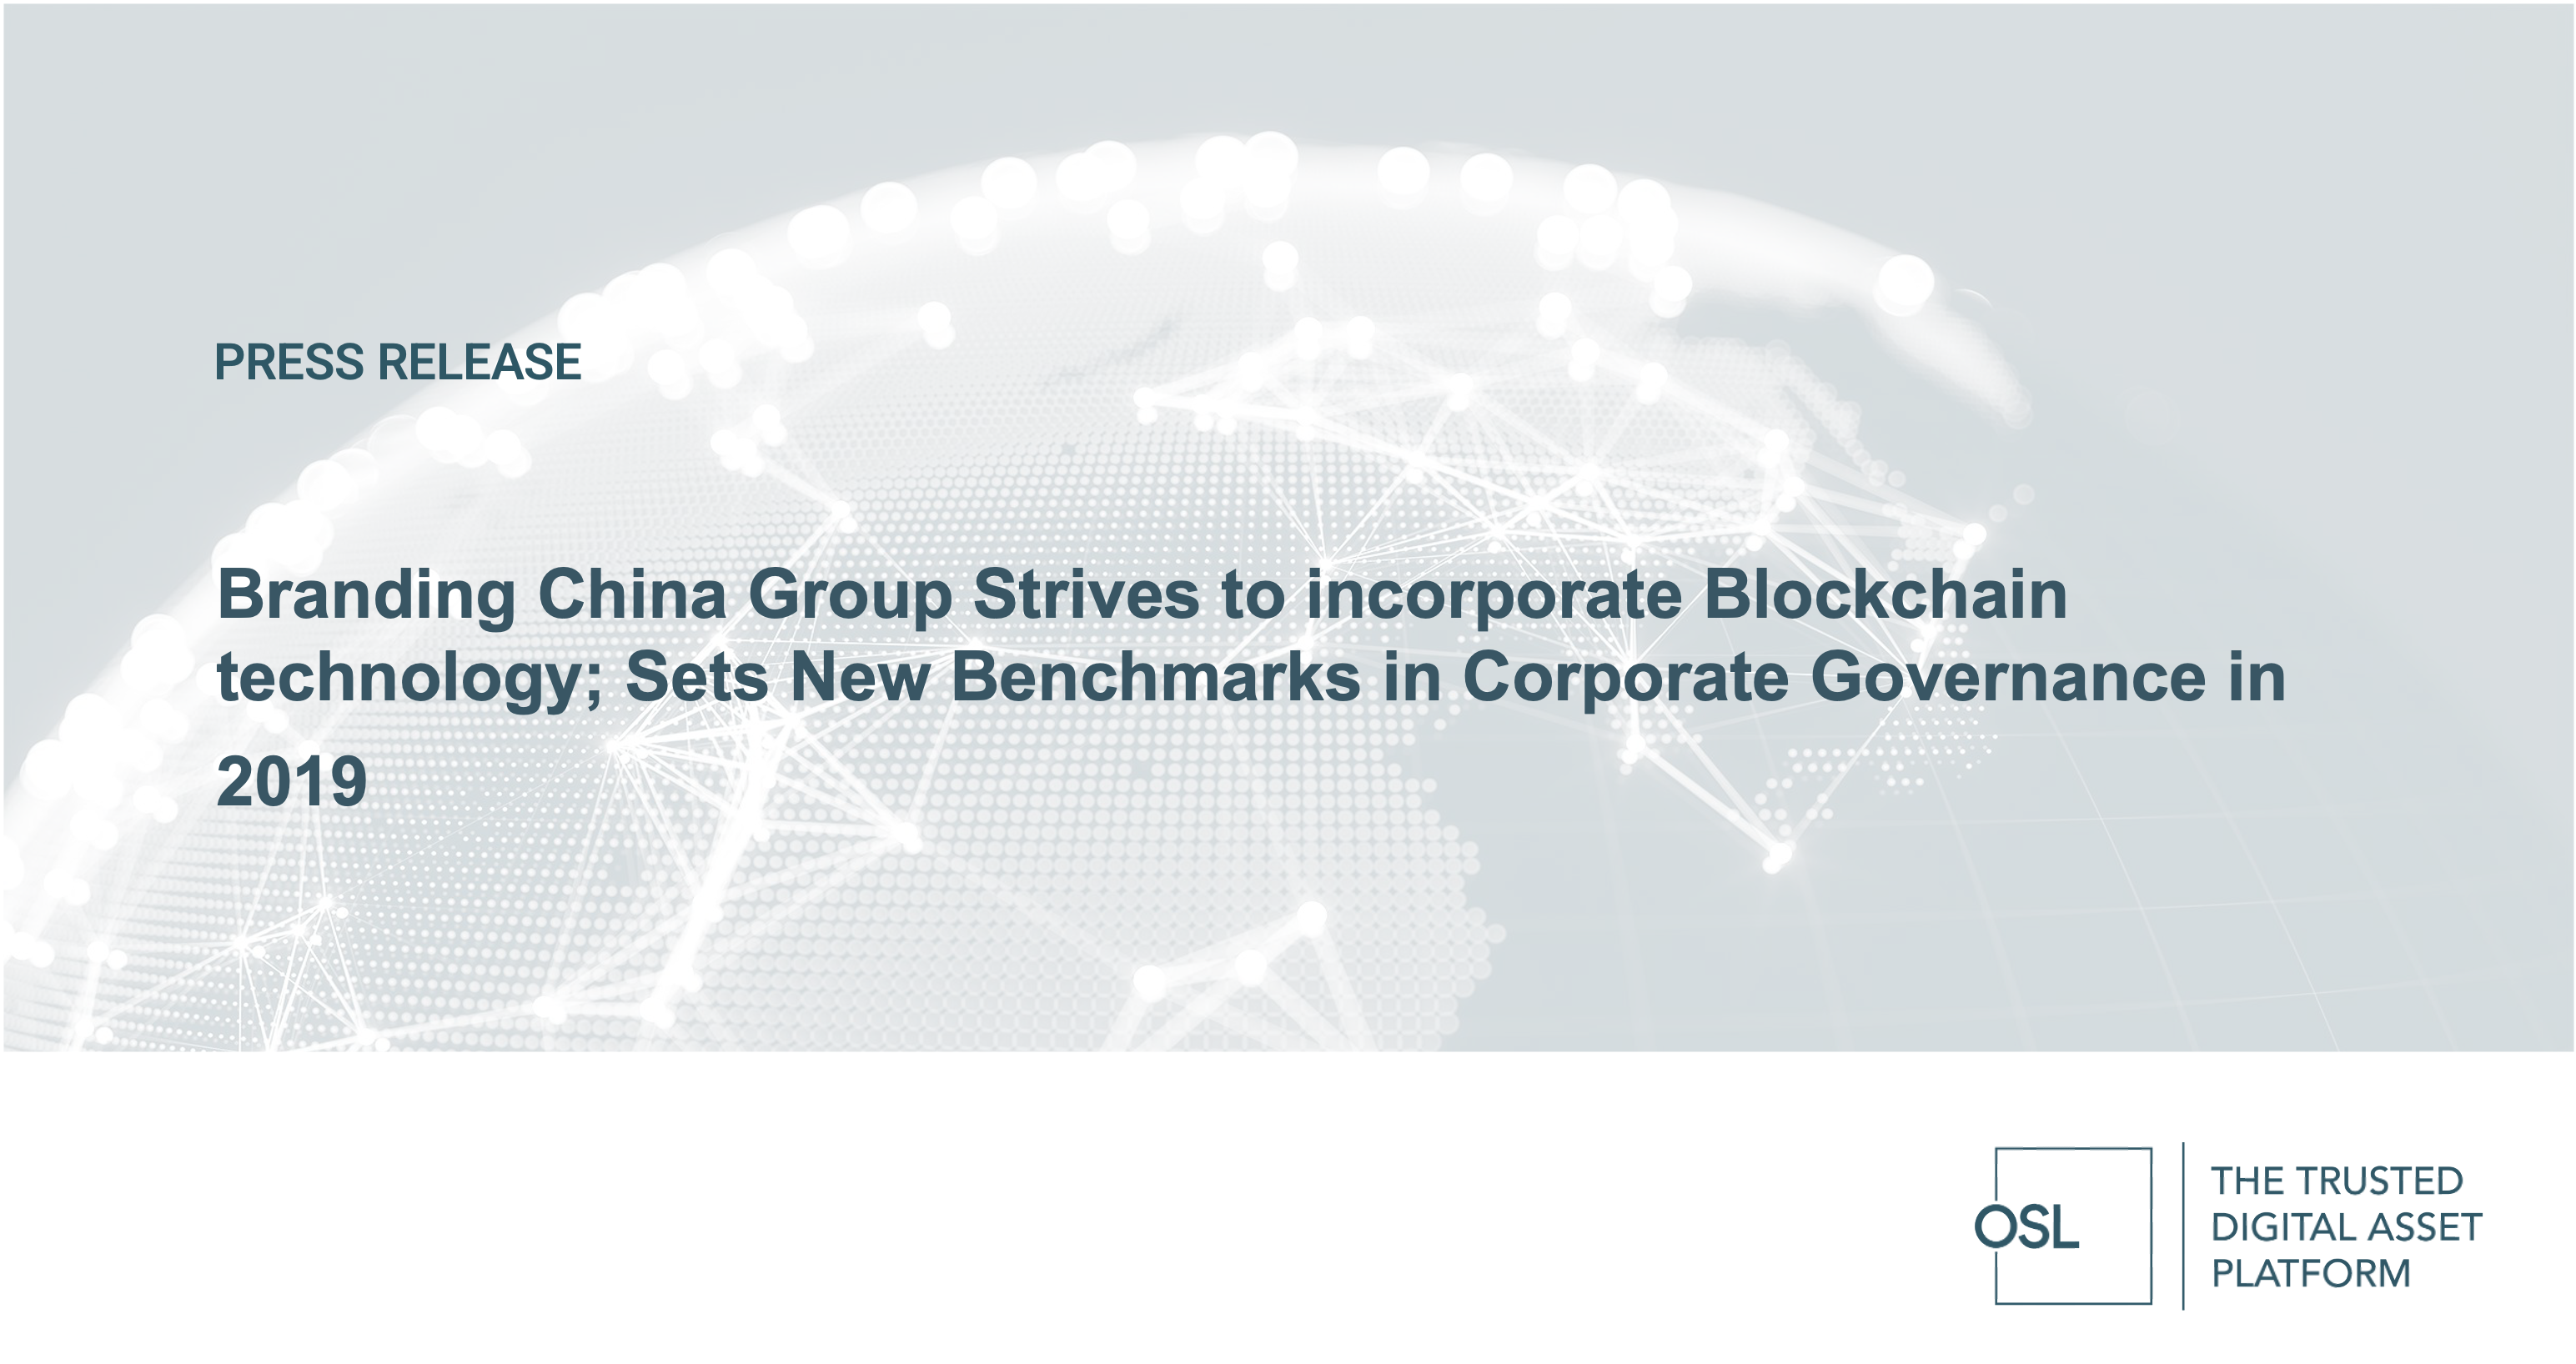 Branding China Group Strives to incorporate Blockchain technology; Sets New Benchmarks in Corporate Governance in 2019